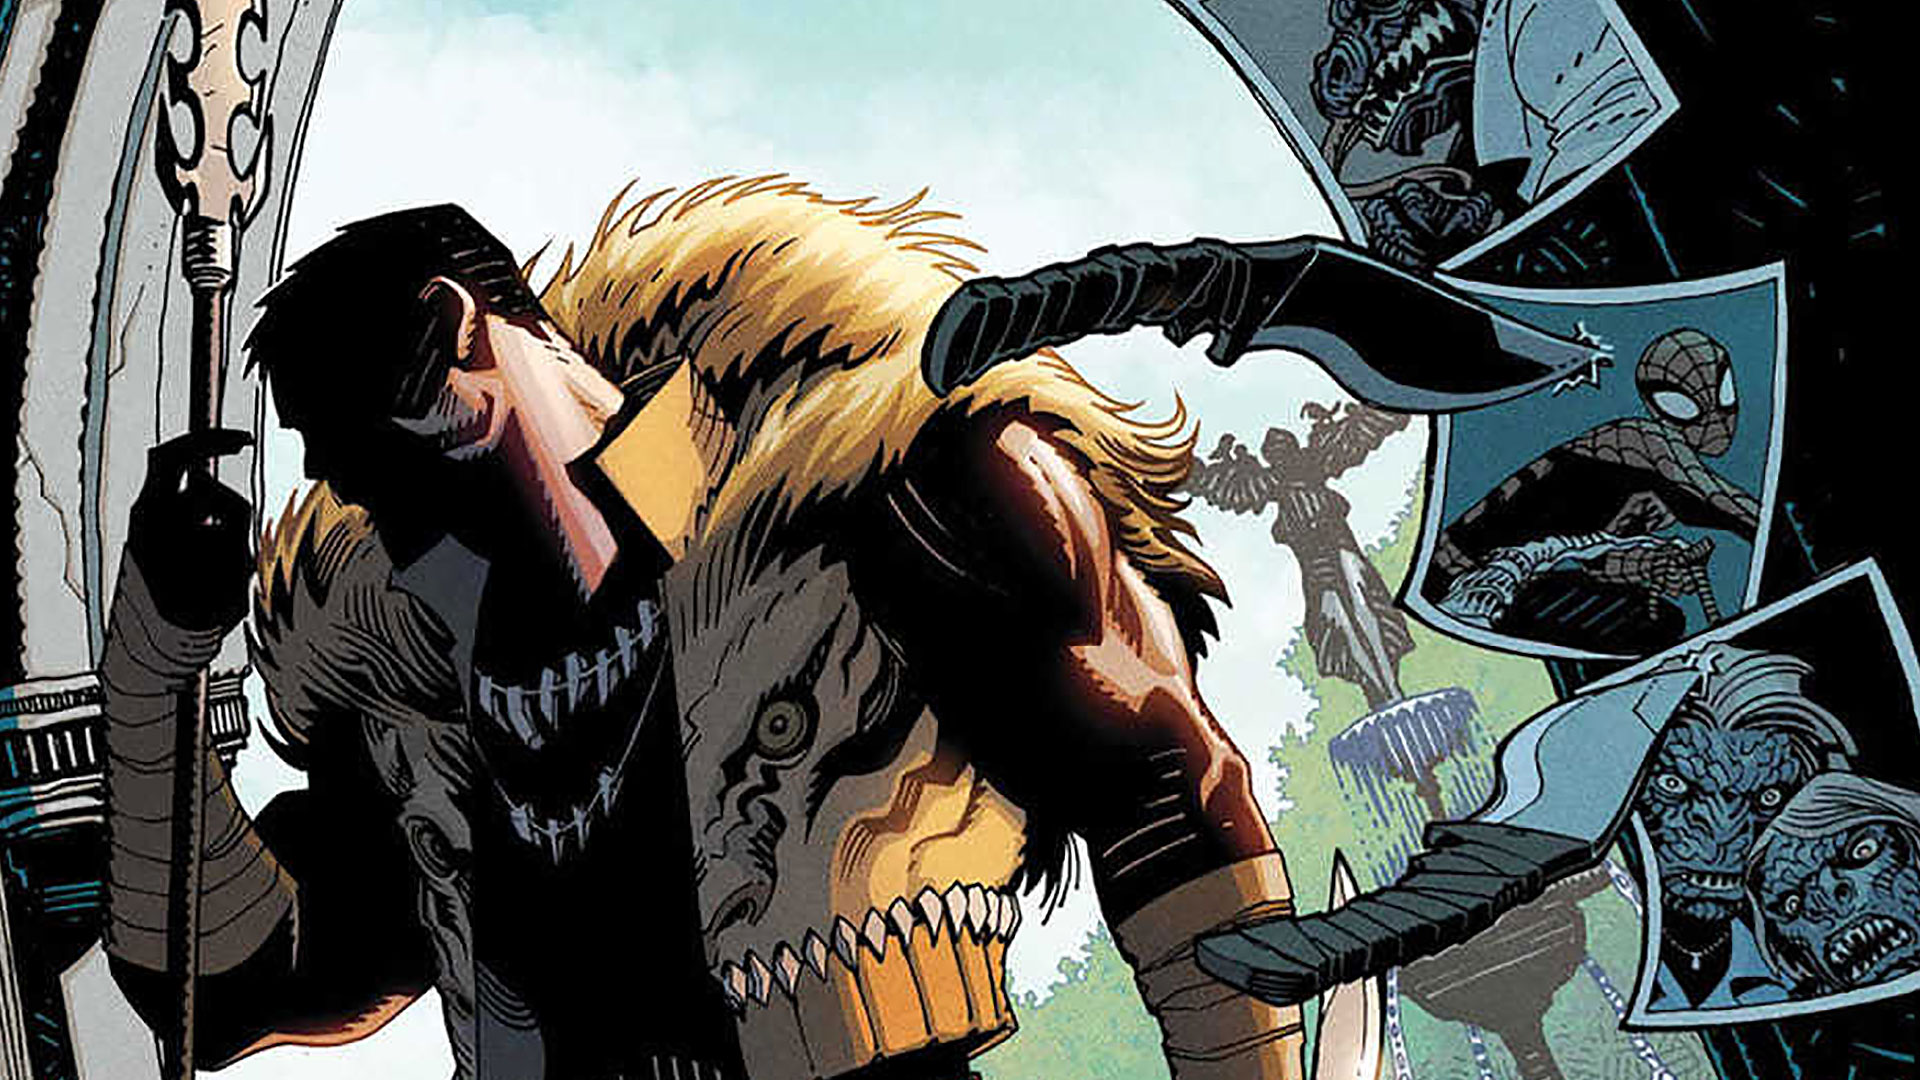 Kraven The Hunter and retconning established characters for movies